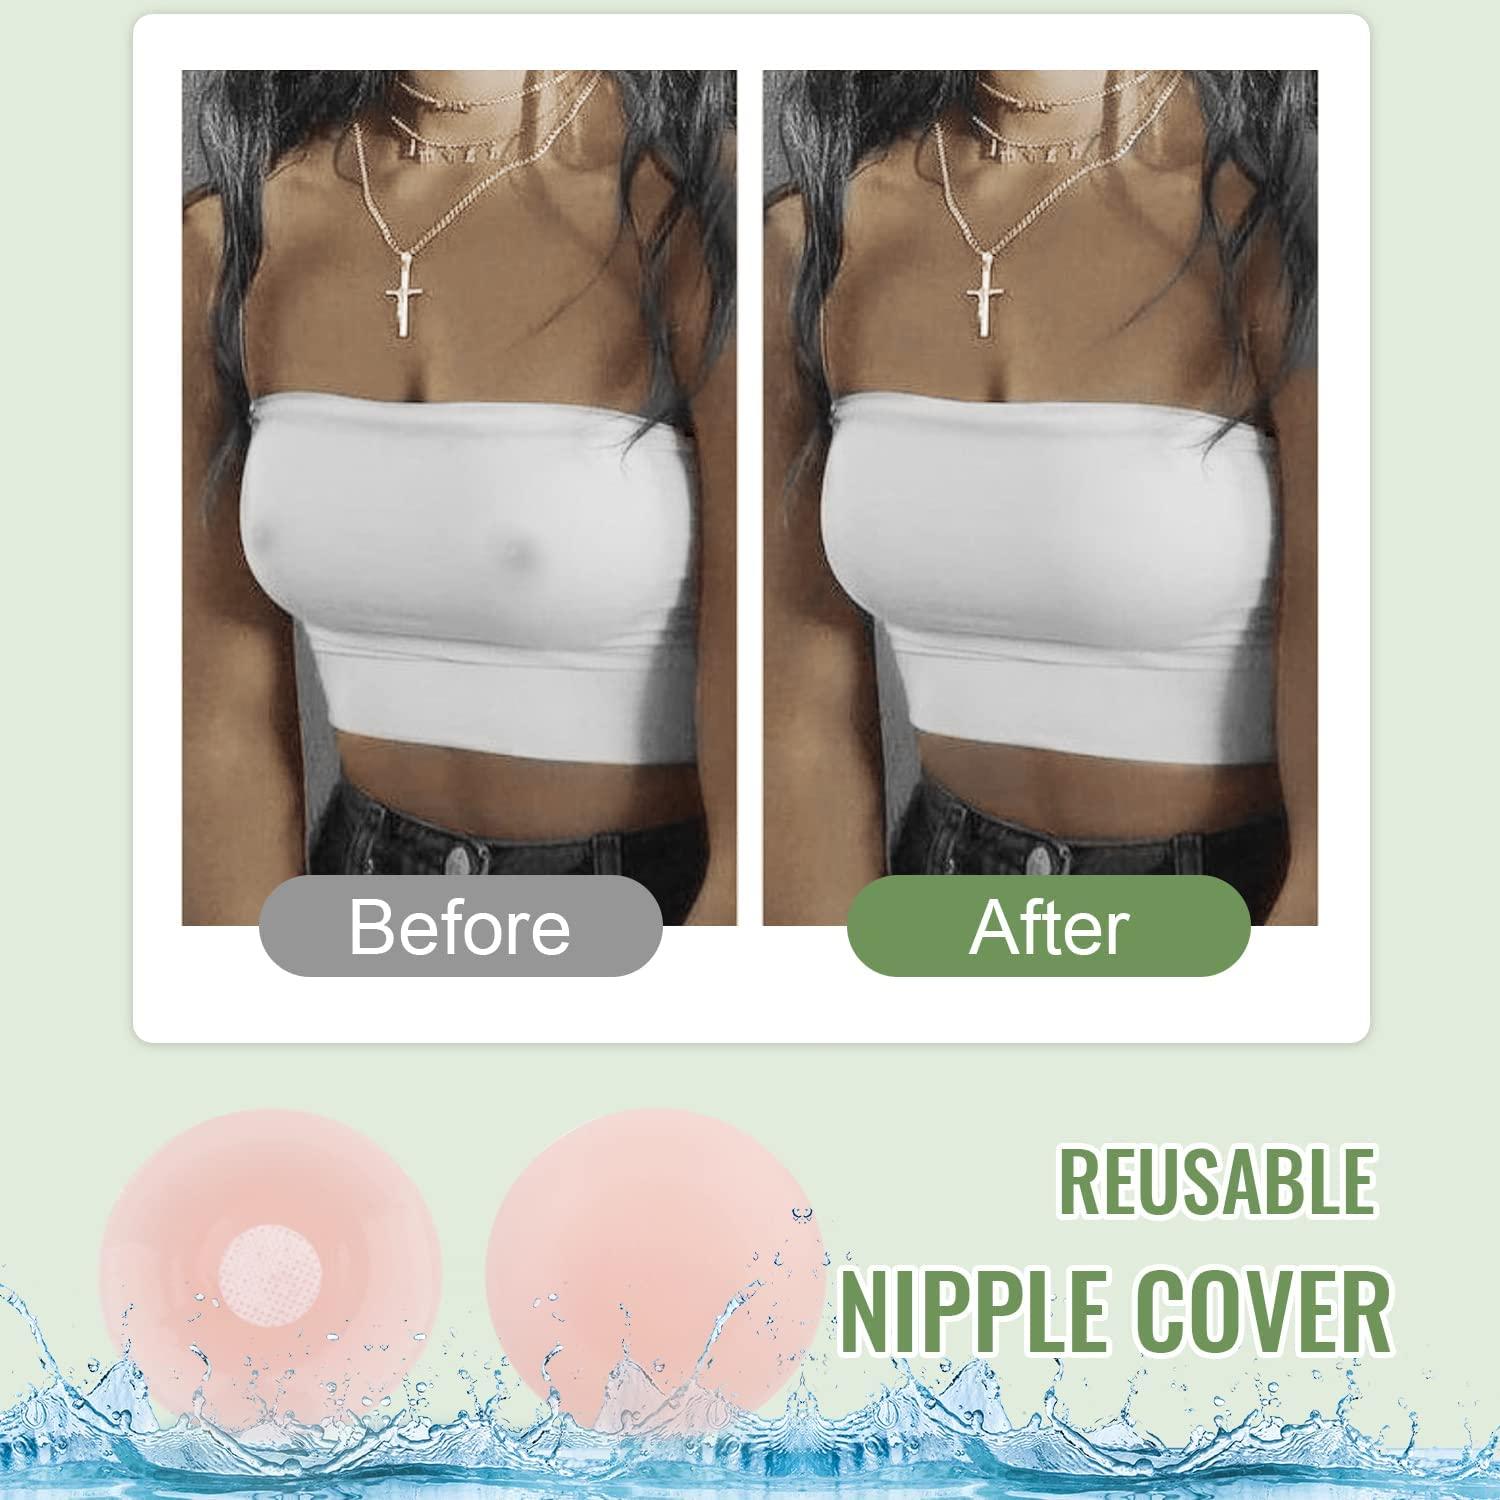 How to Use Push Up Tape, Breast Lift Tape for Large Breast